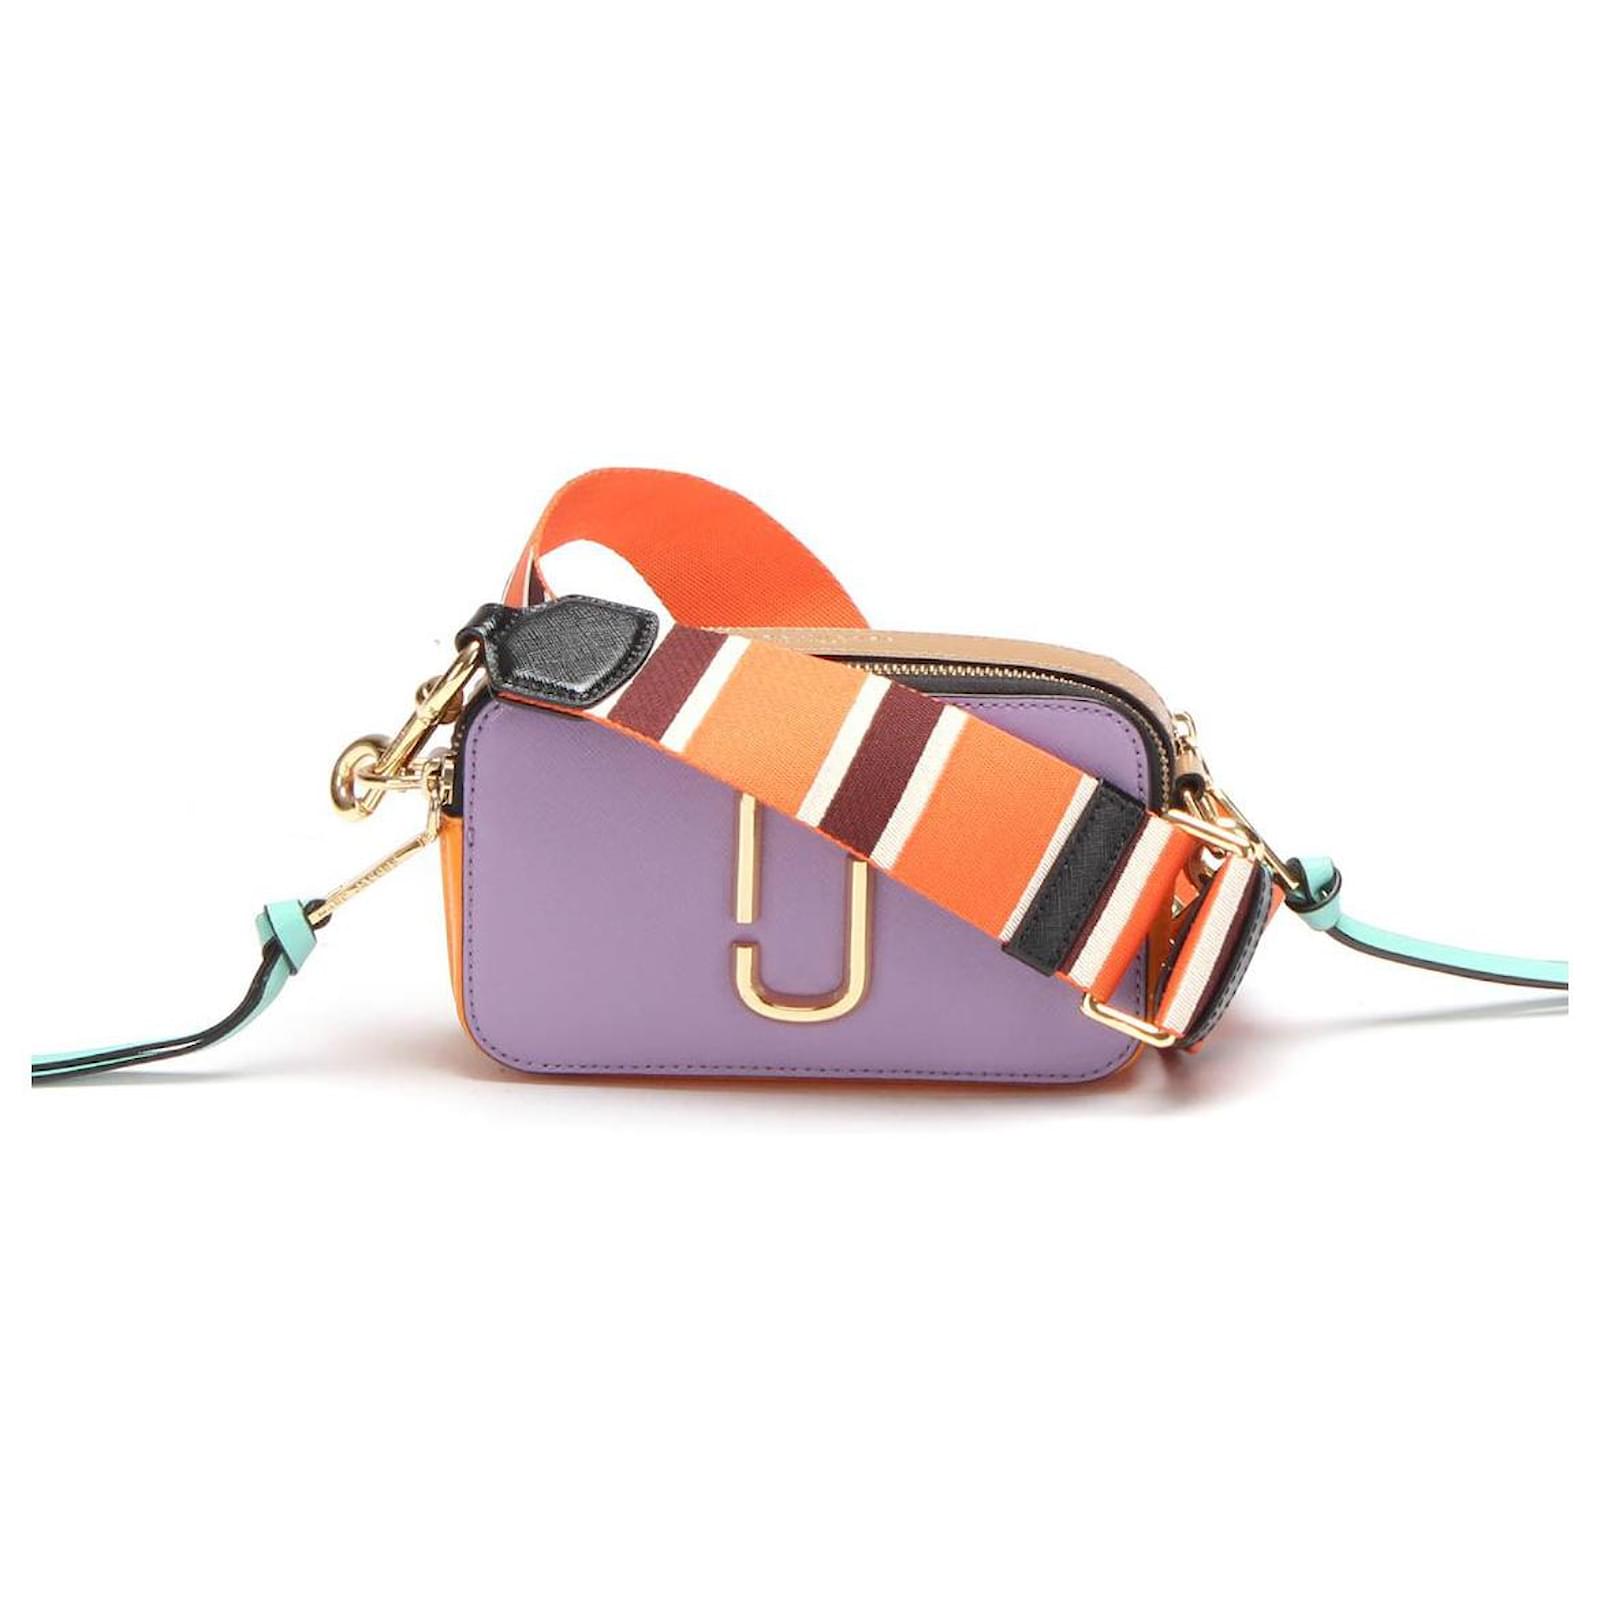 The Snapshot multicolor Marc Jacobs bag